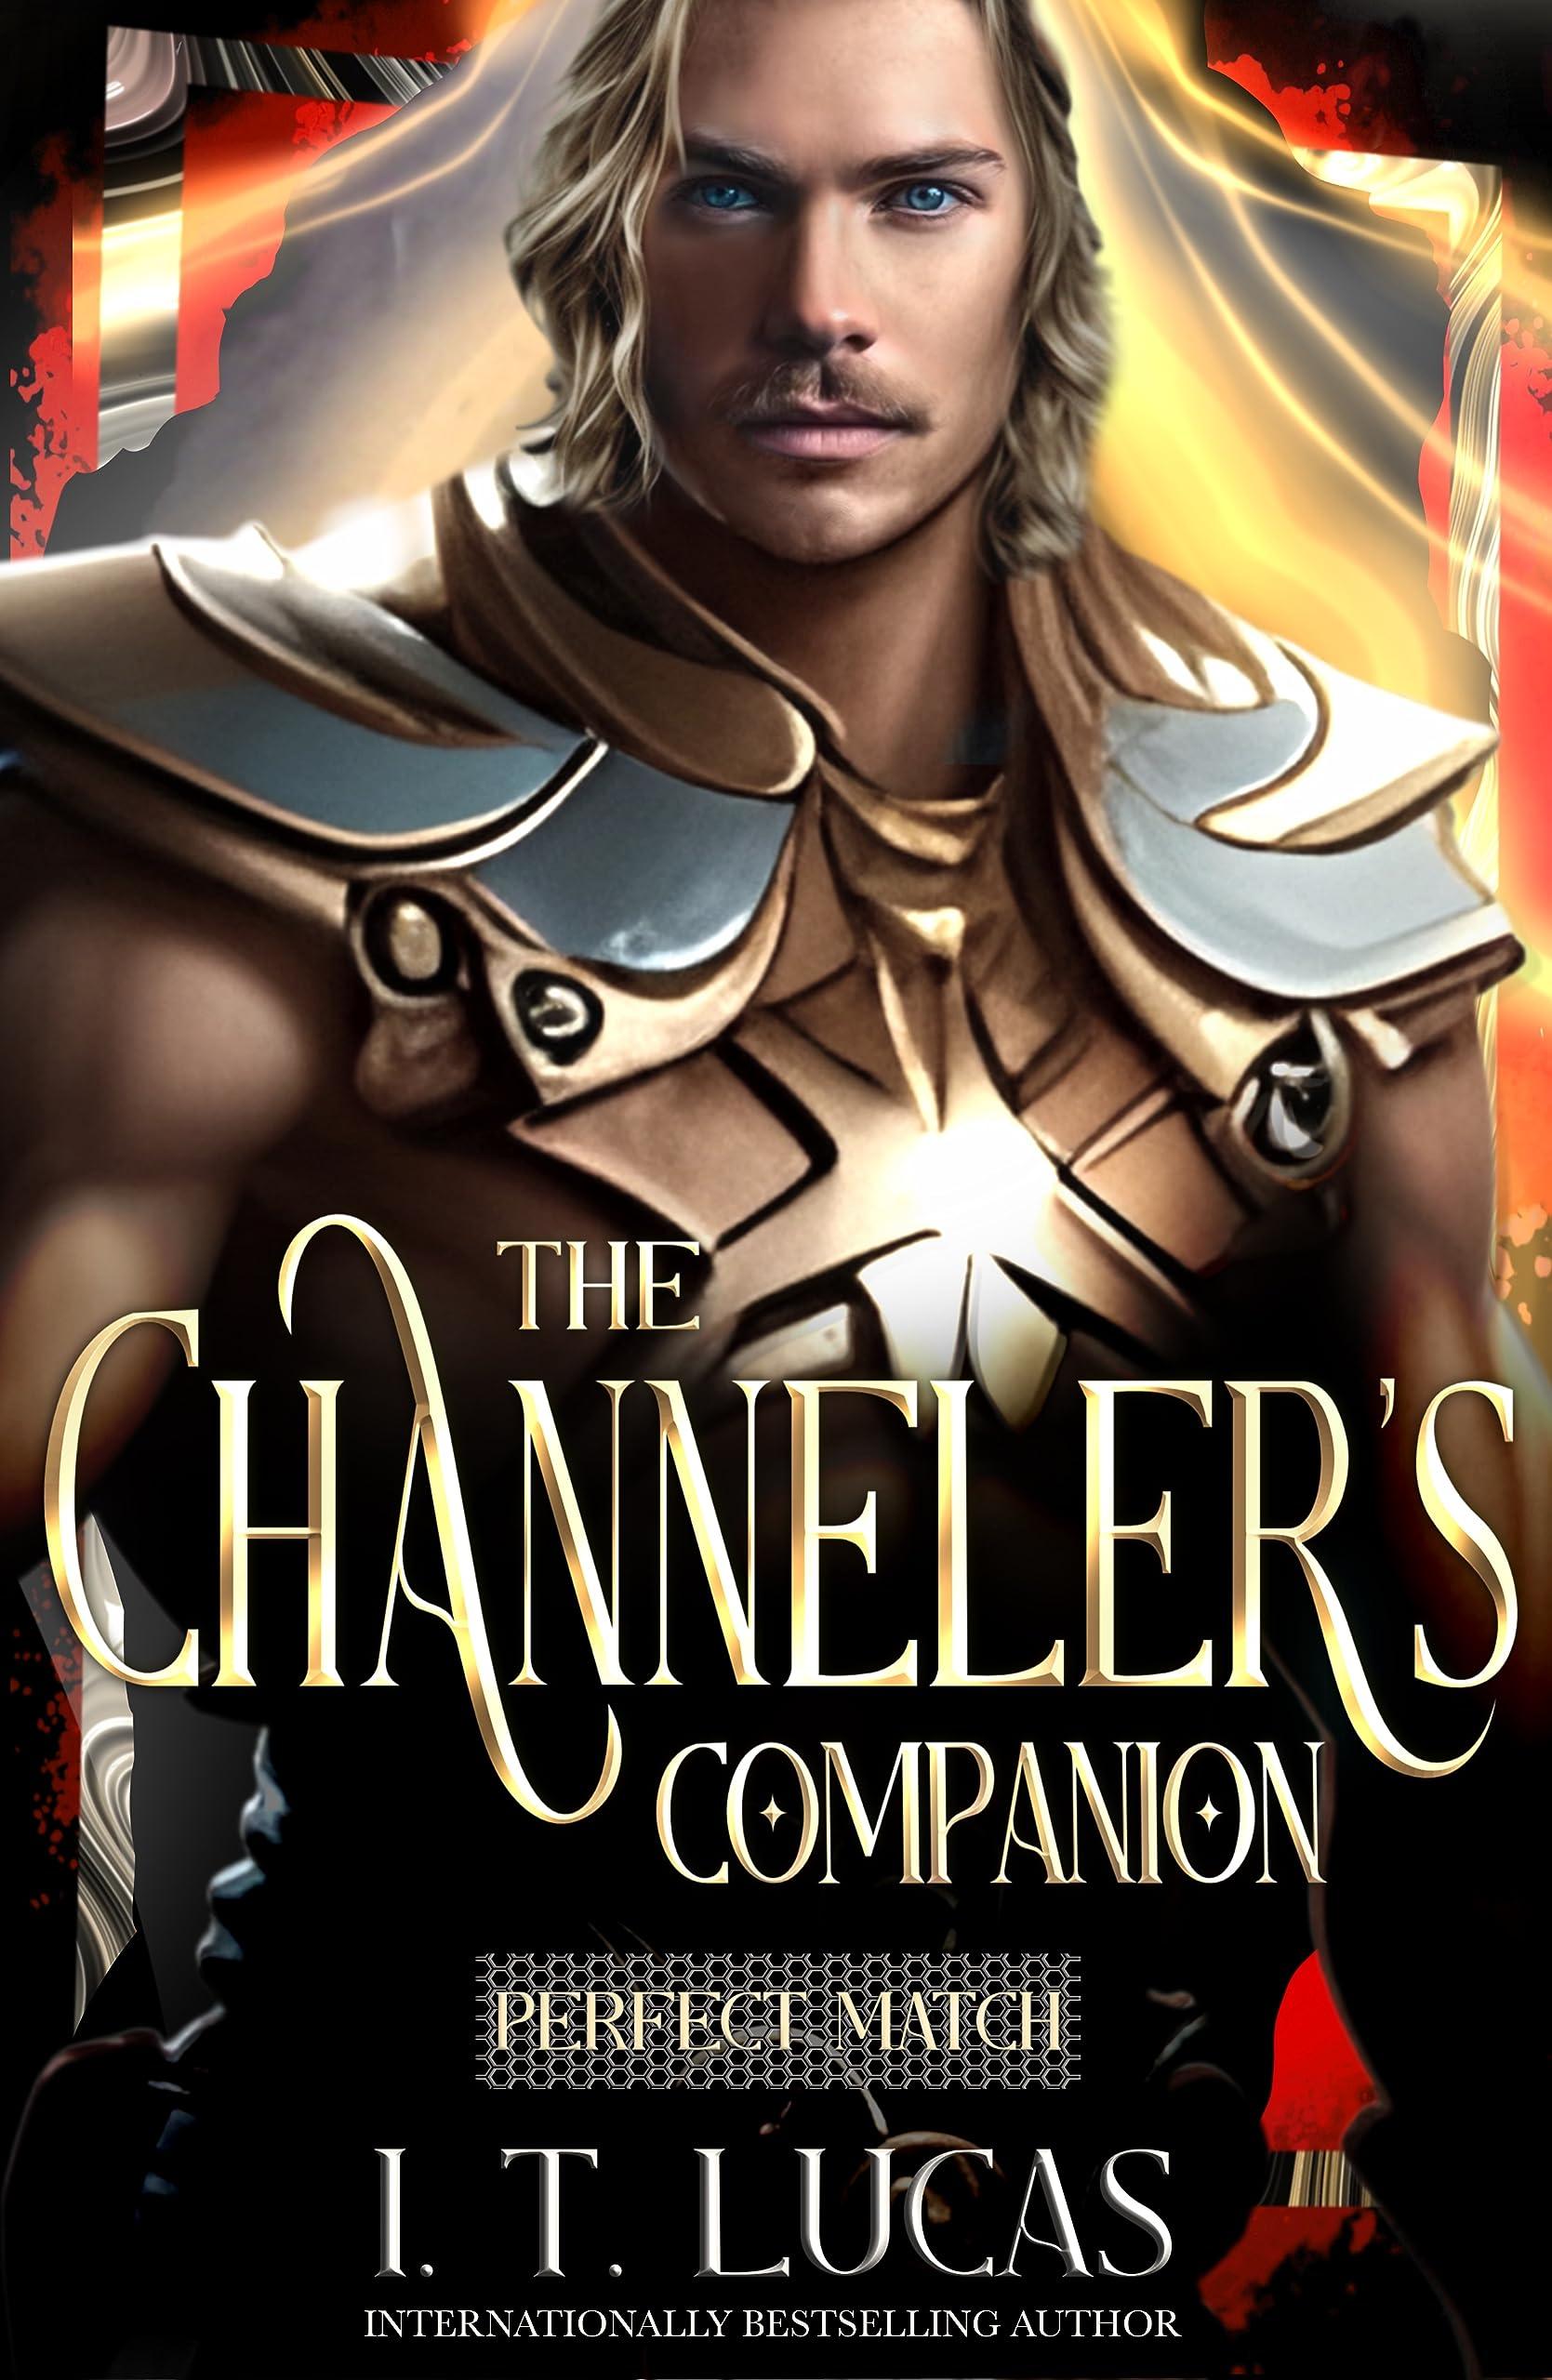 Perfect Match: The Channeler’s Companion